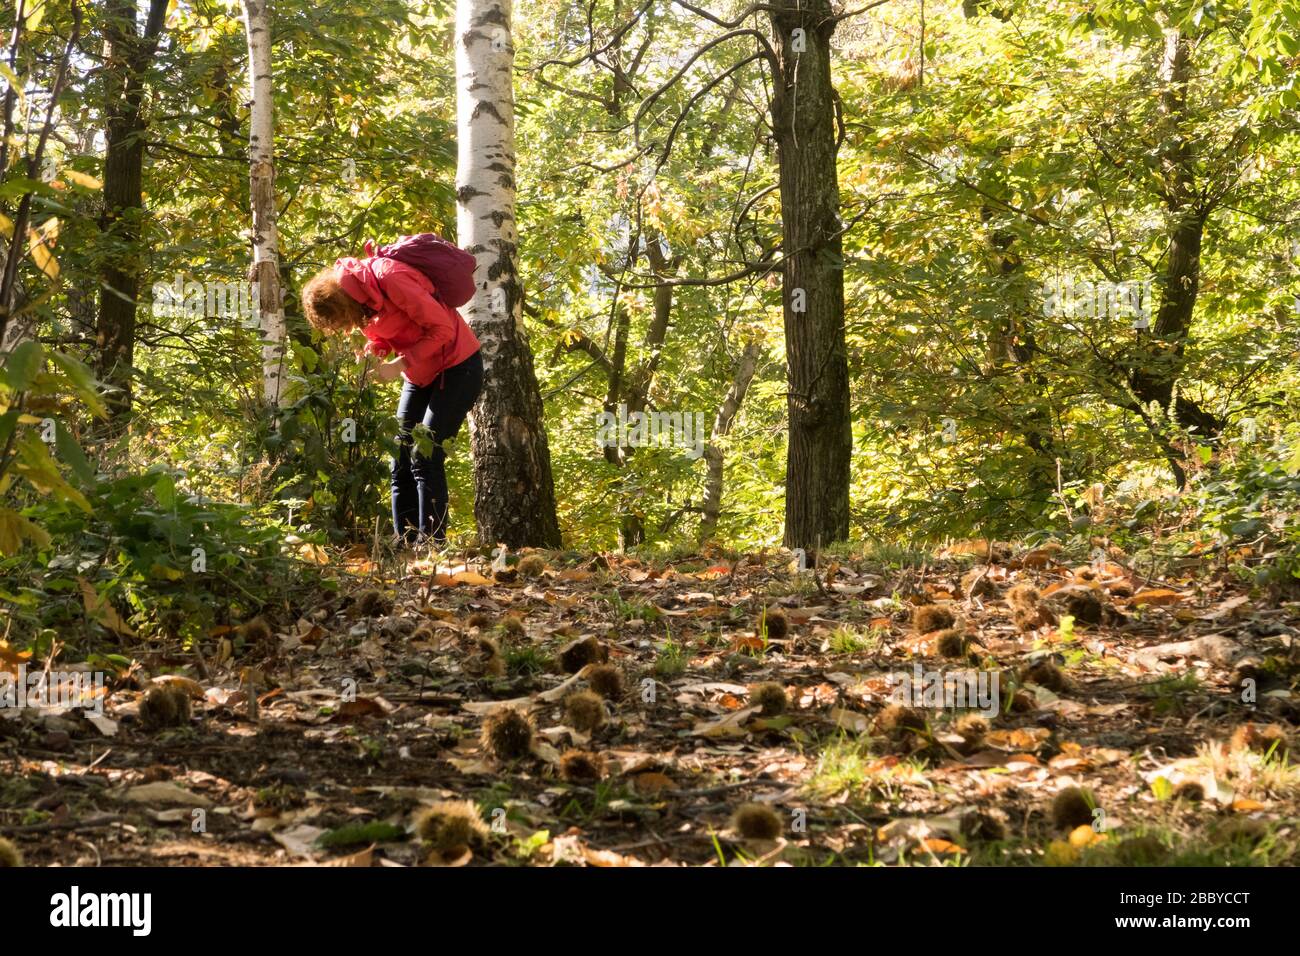 A woman foraging for wild food in a forest in Italy Stock Photo